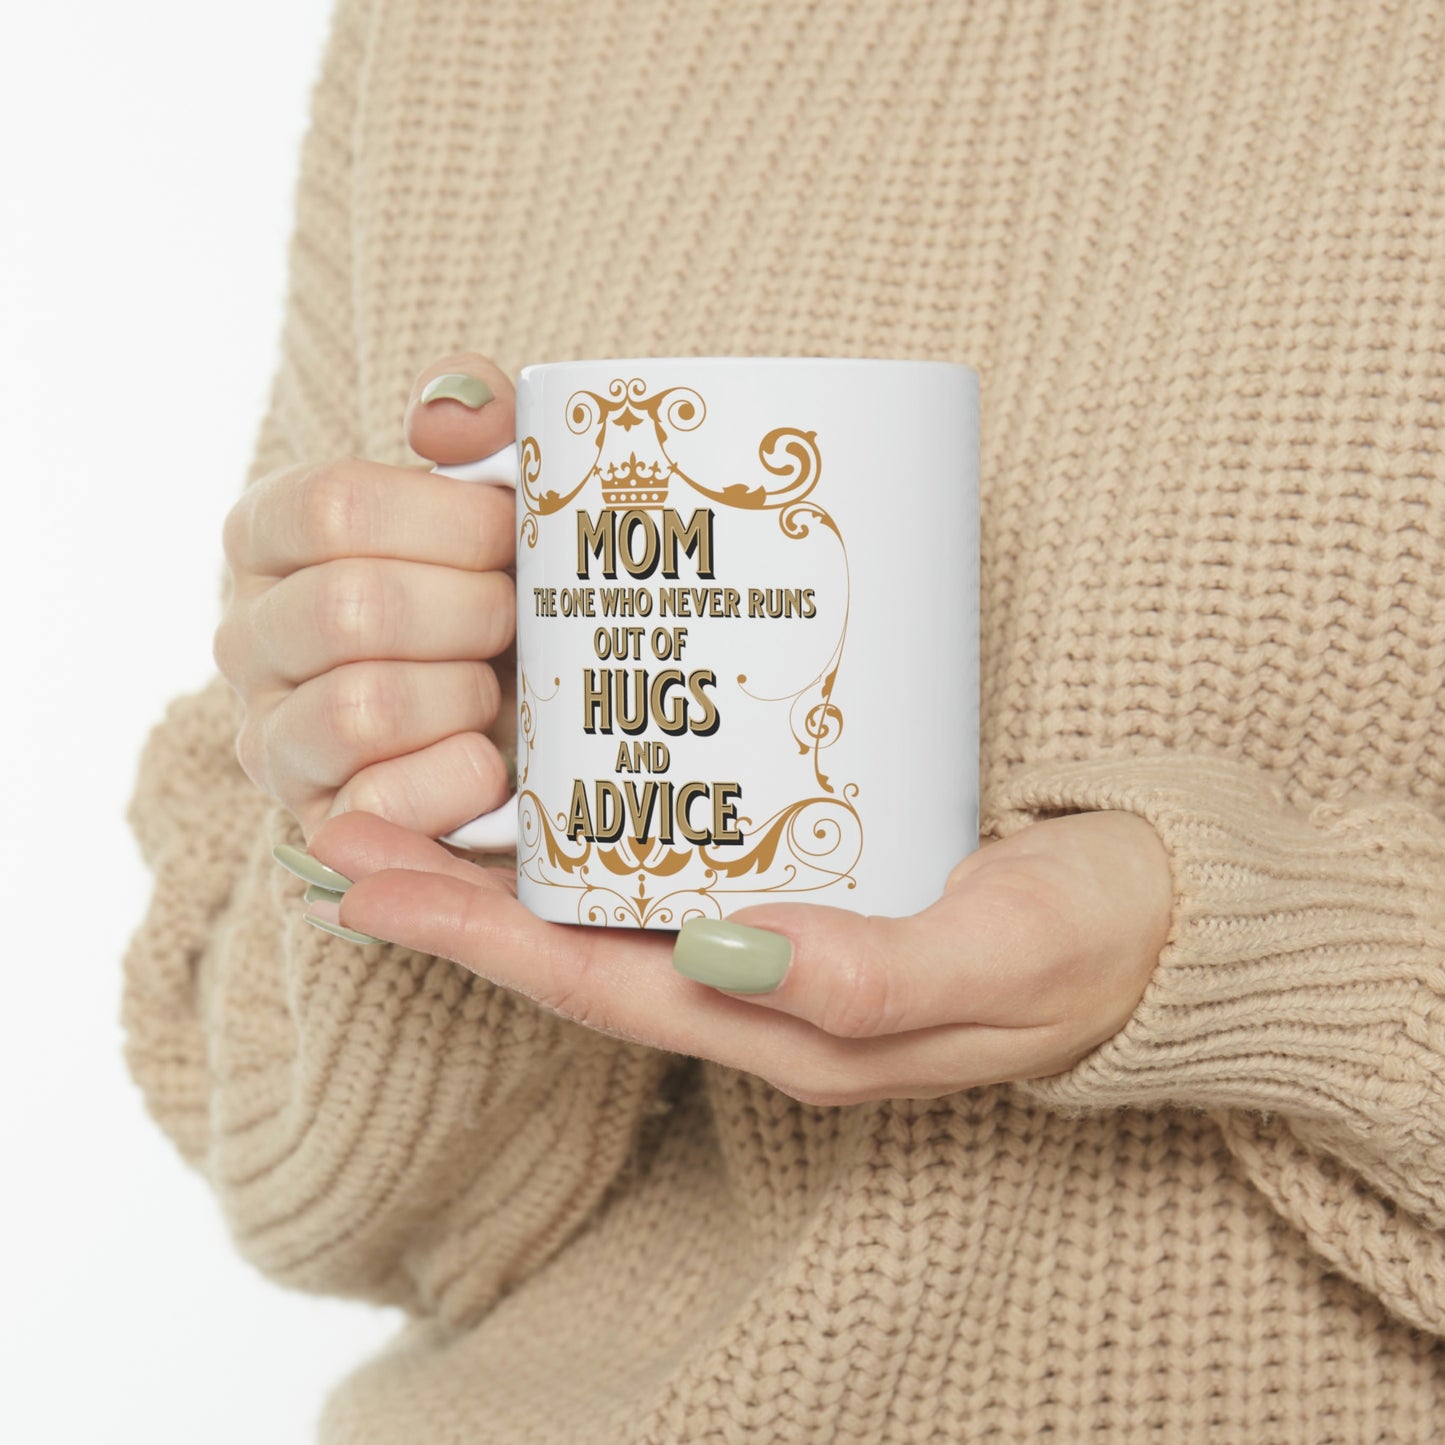 Ceramic Mug 11oz, Mom the One Who Never Runs Out of Hugs and Advice, Gifts for Mom